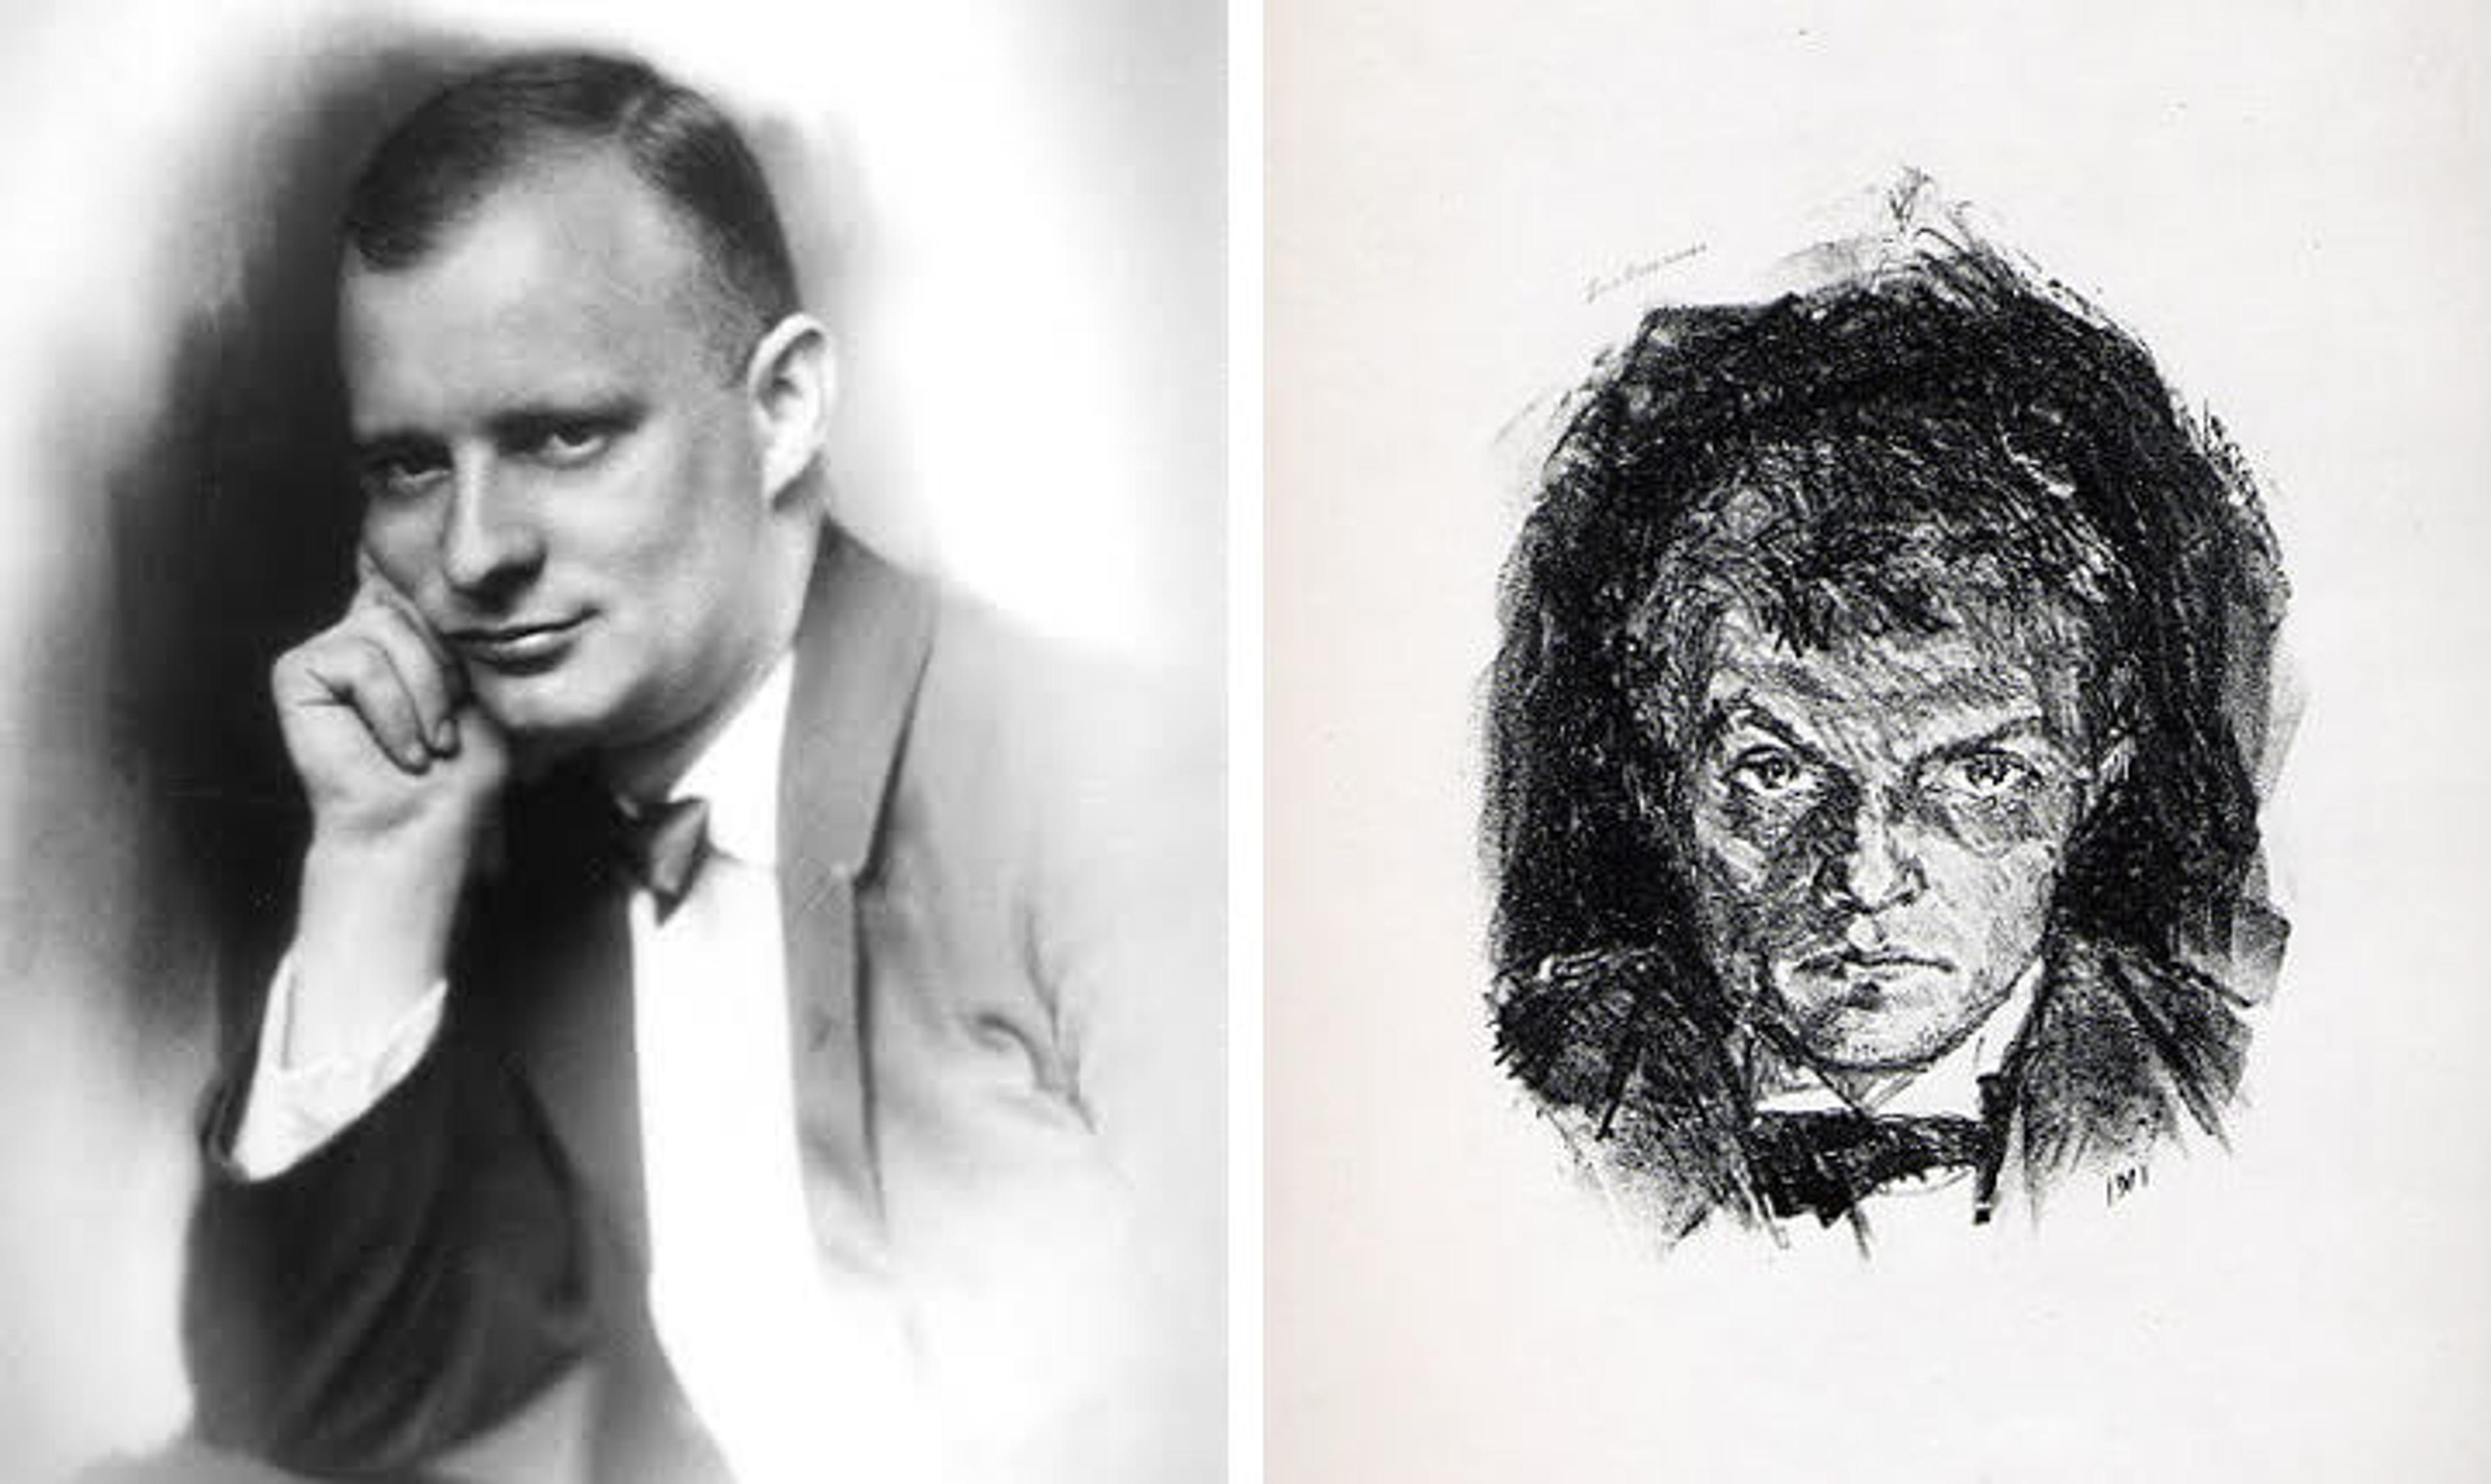 Photo of composer Paul Hindemith in 1923 (left) and a 1911 lithograph self-portrait by artist Max Beckmann (right)